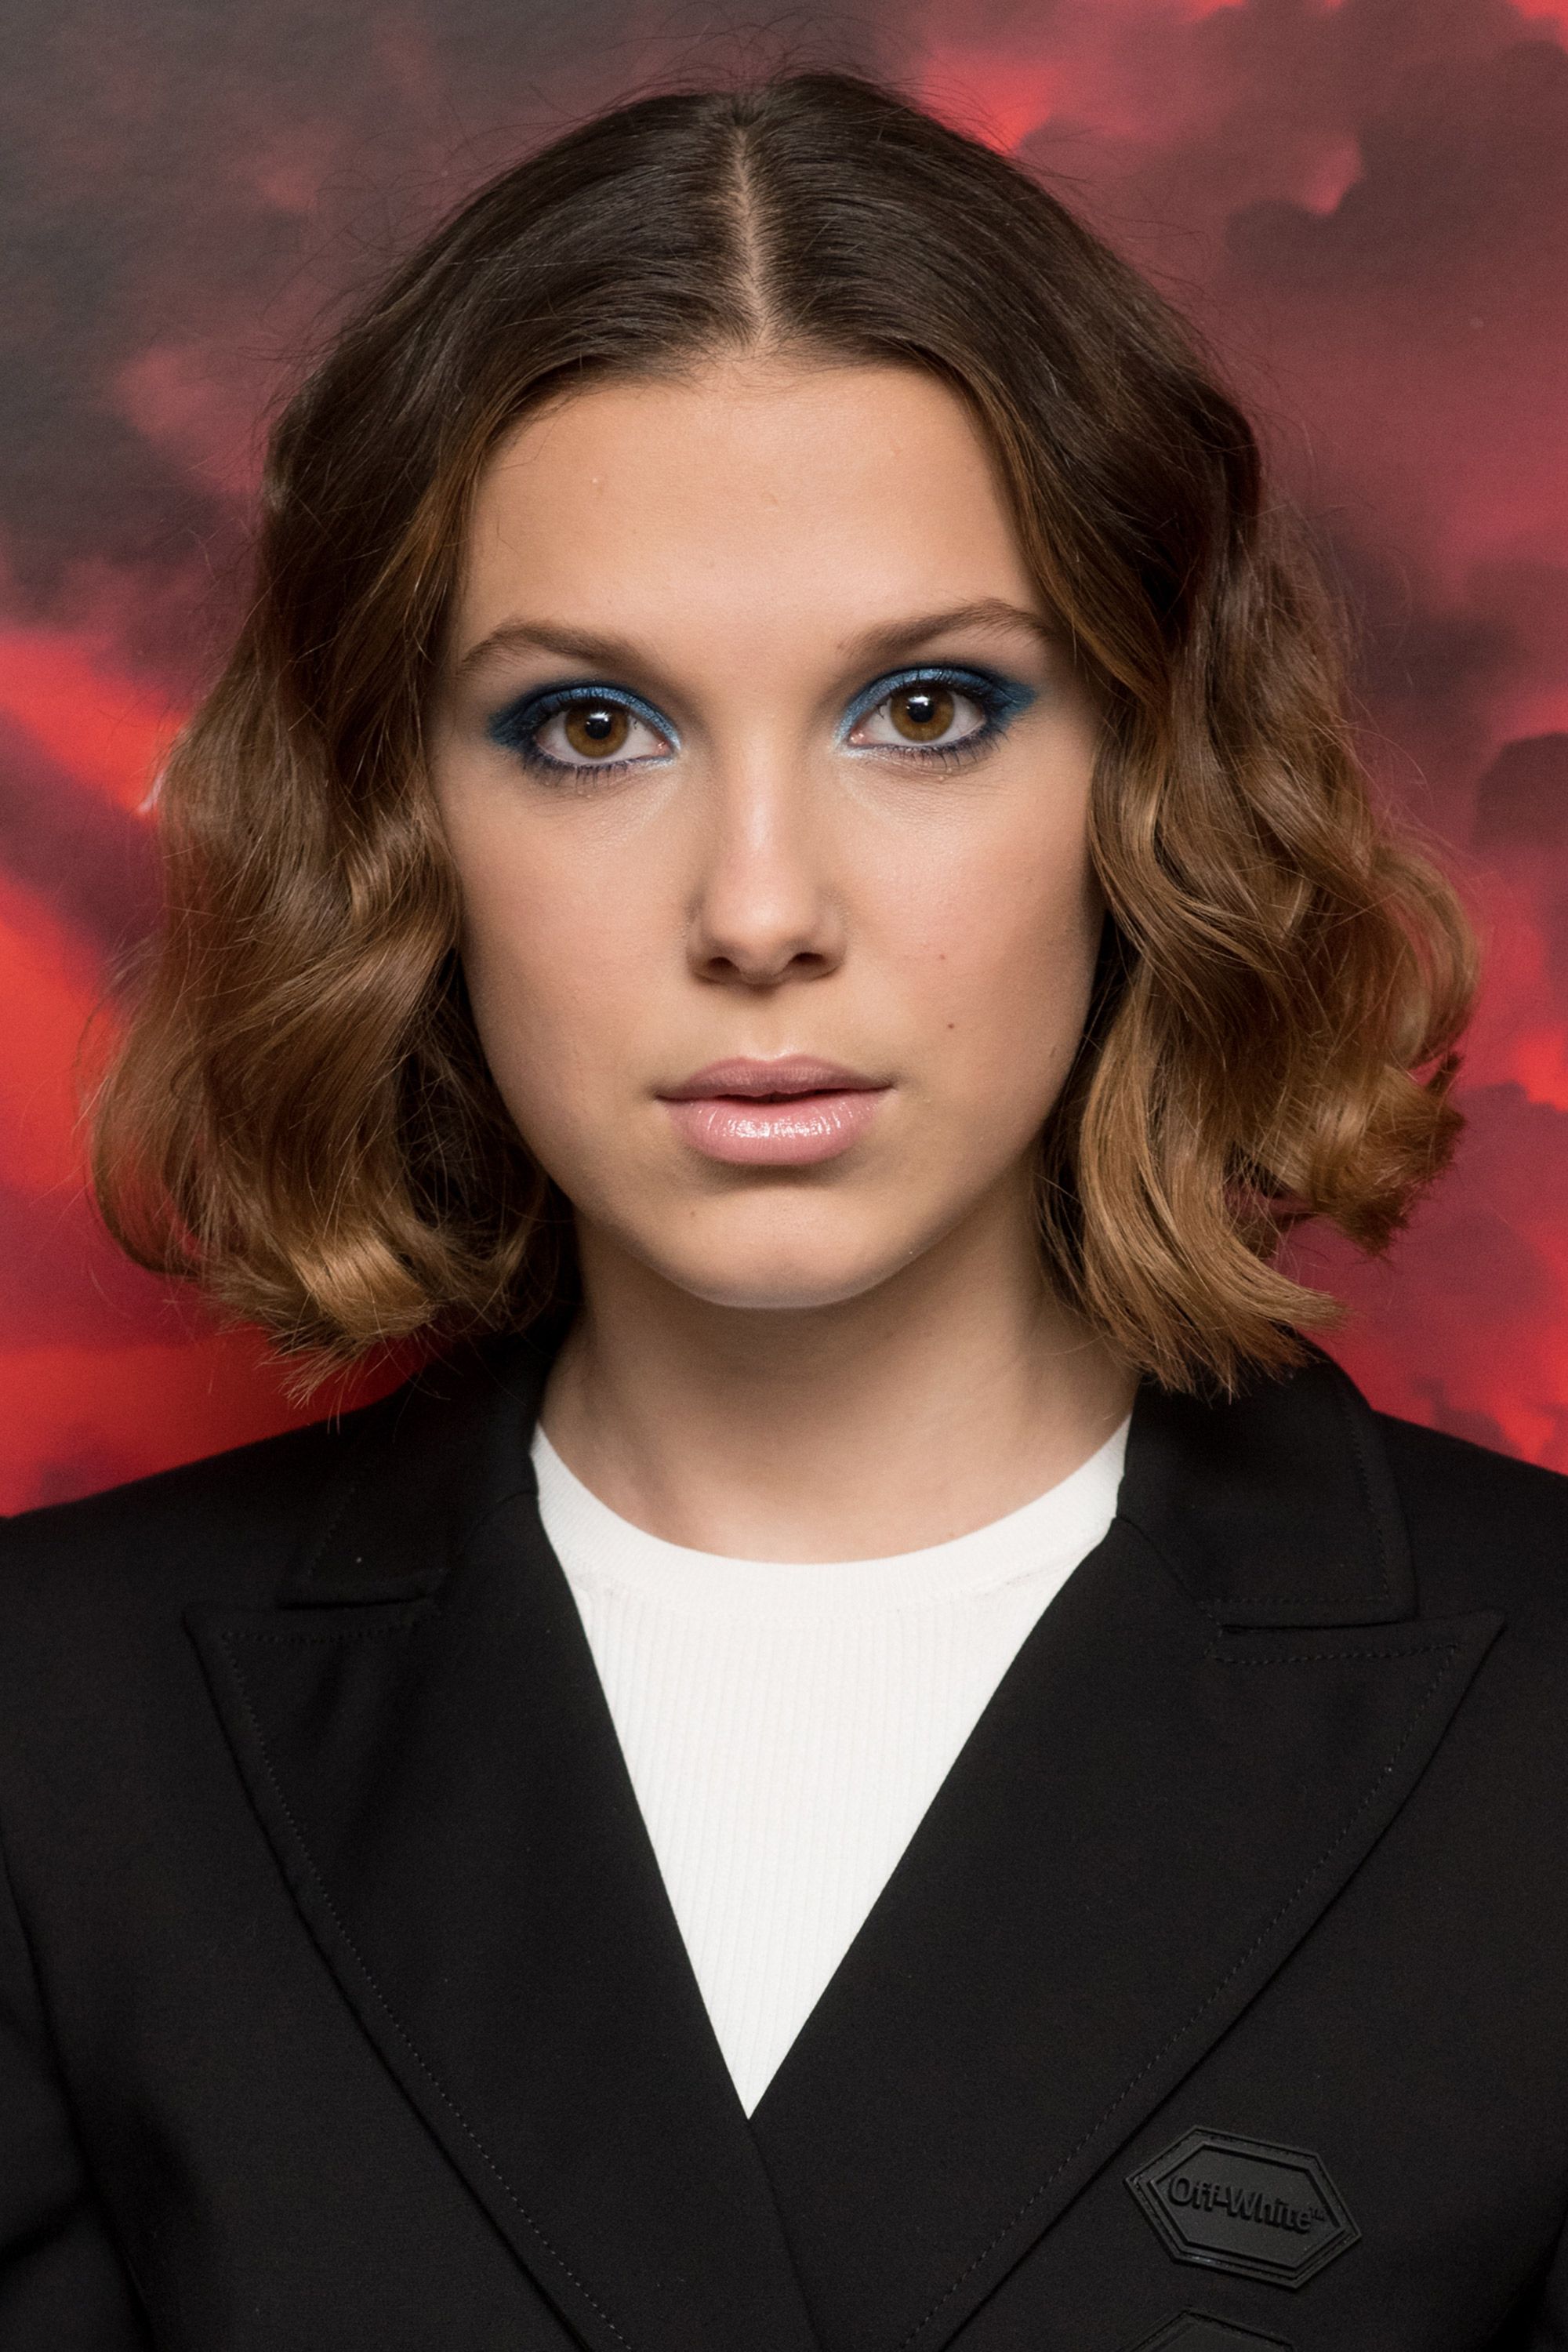 Millie Bobby Brown Beauty Muse